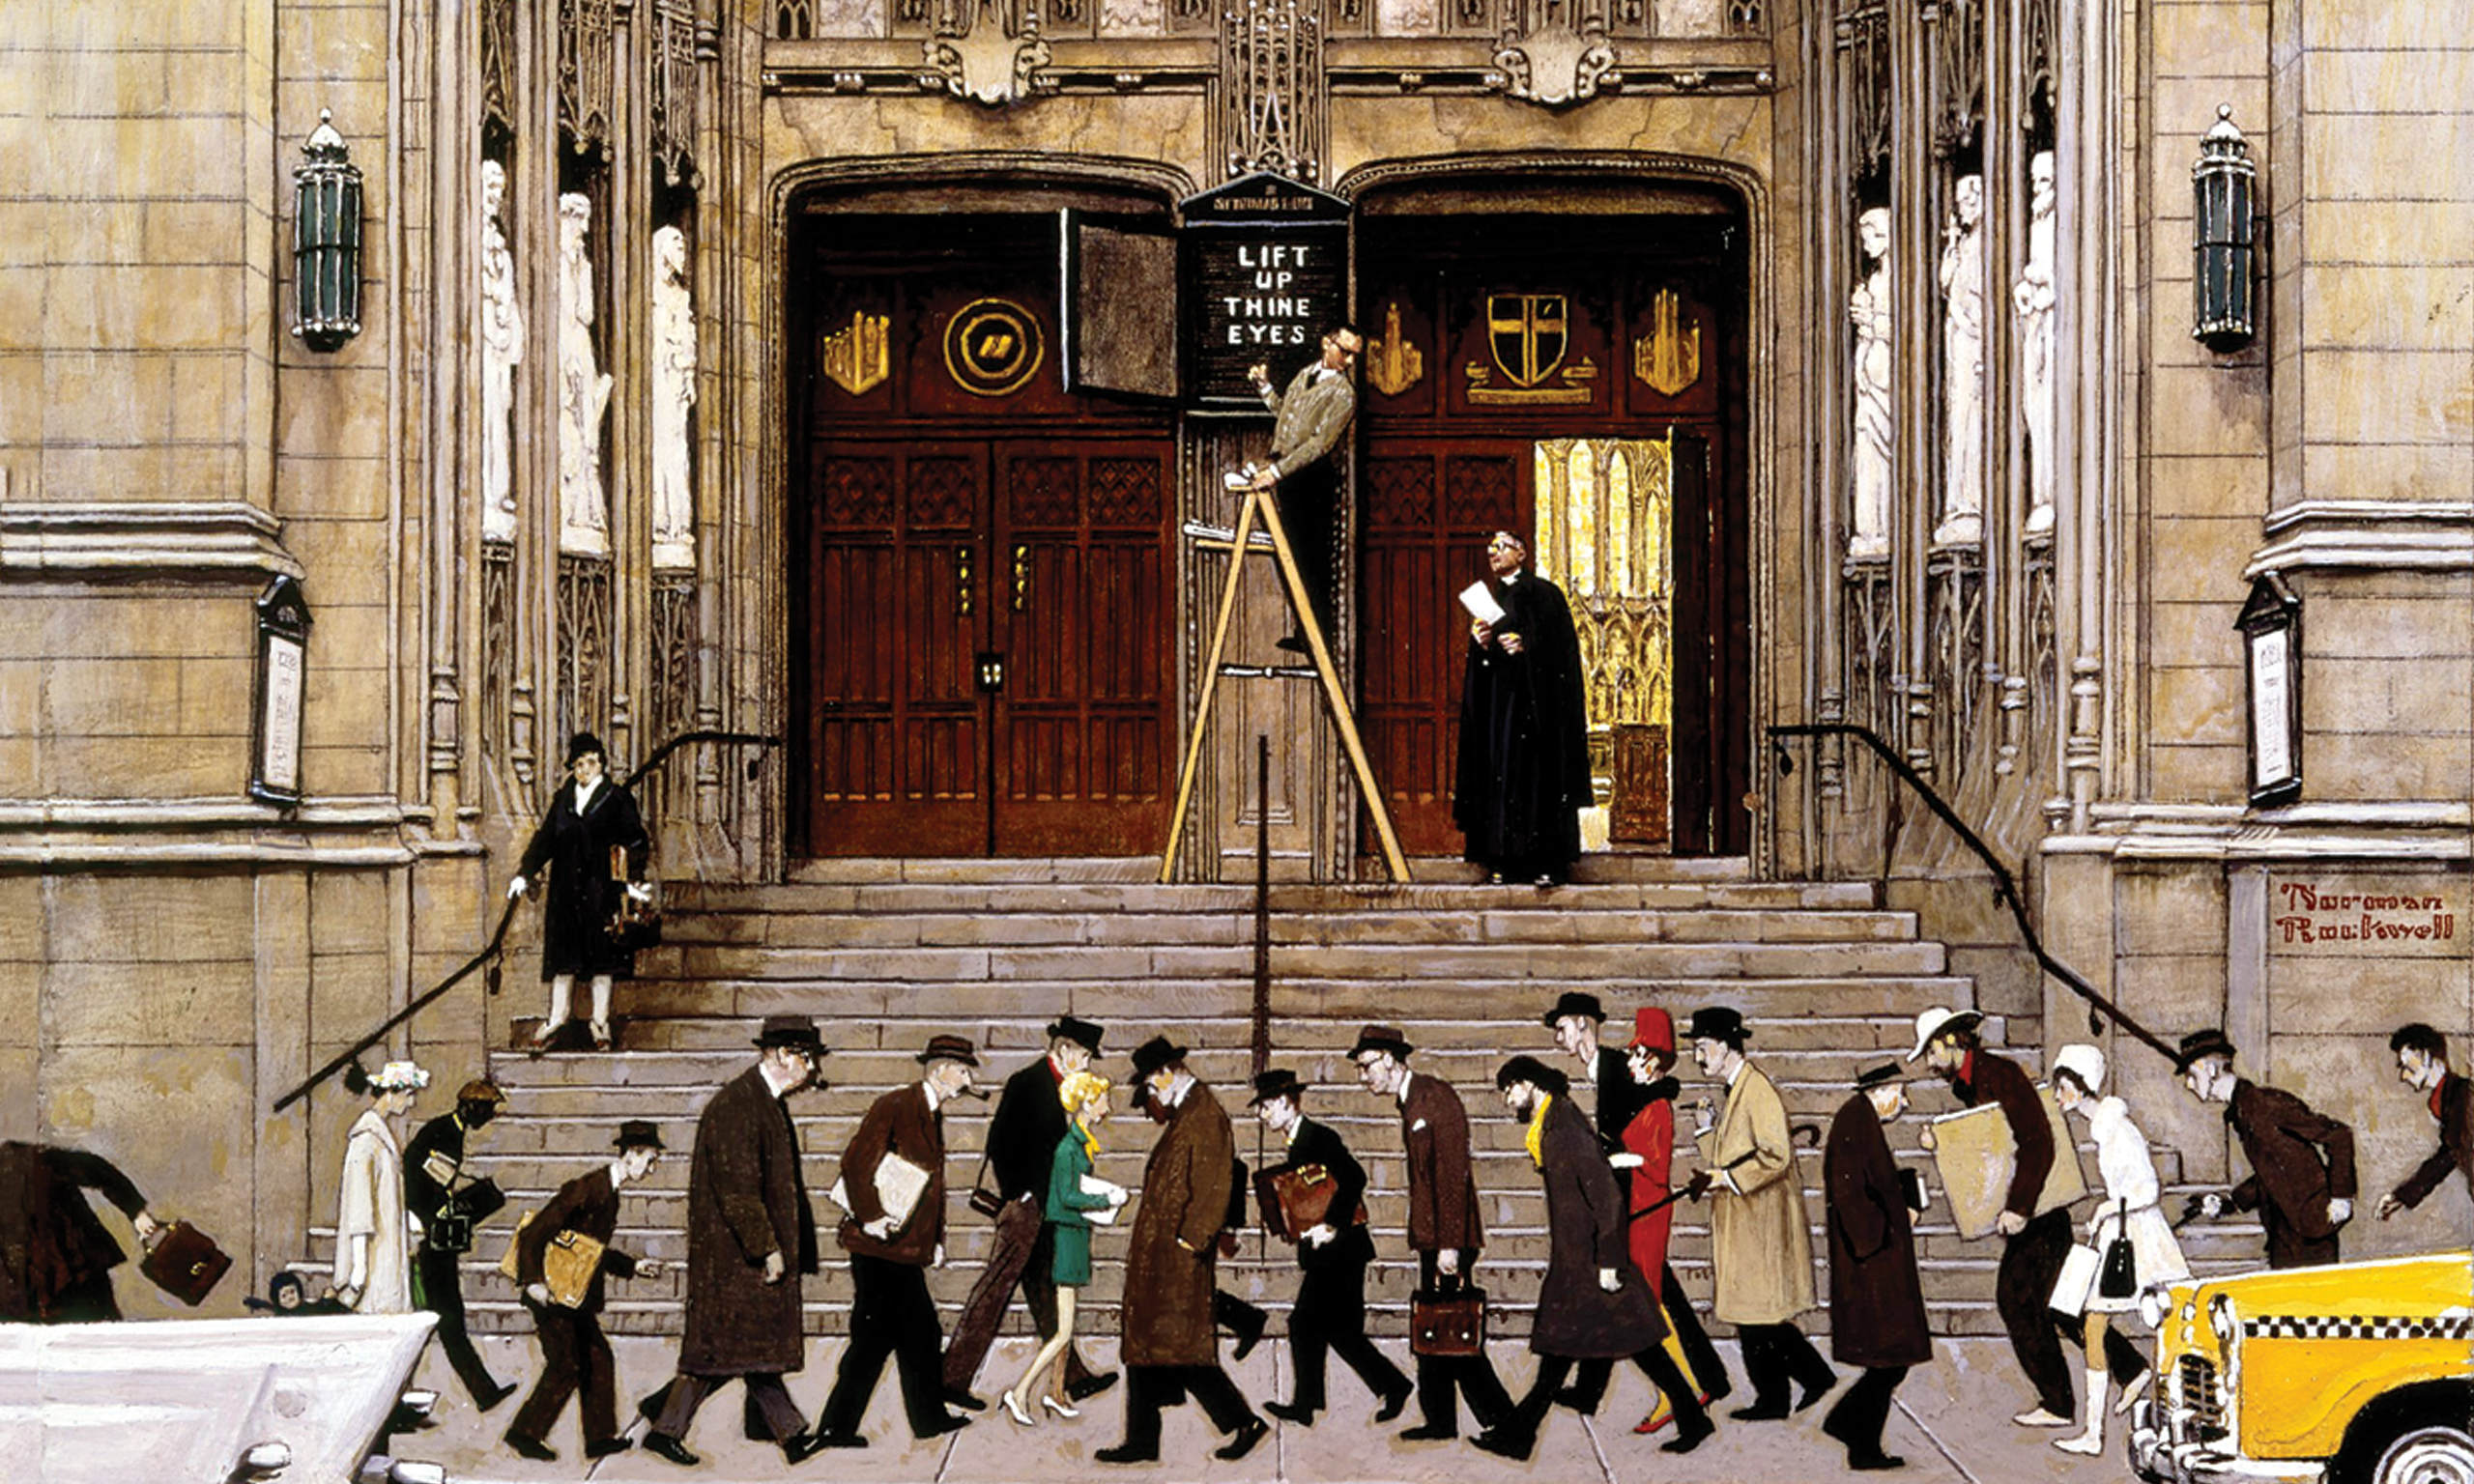 A painting by Norman Rockwell of people walking past a church with their heads down.